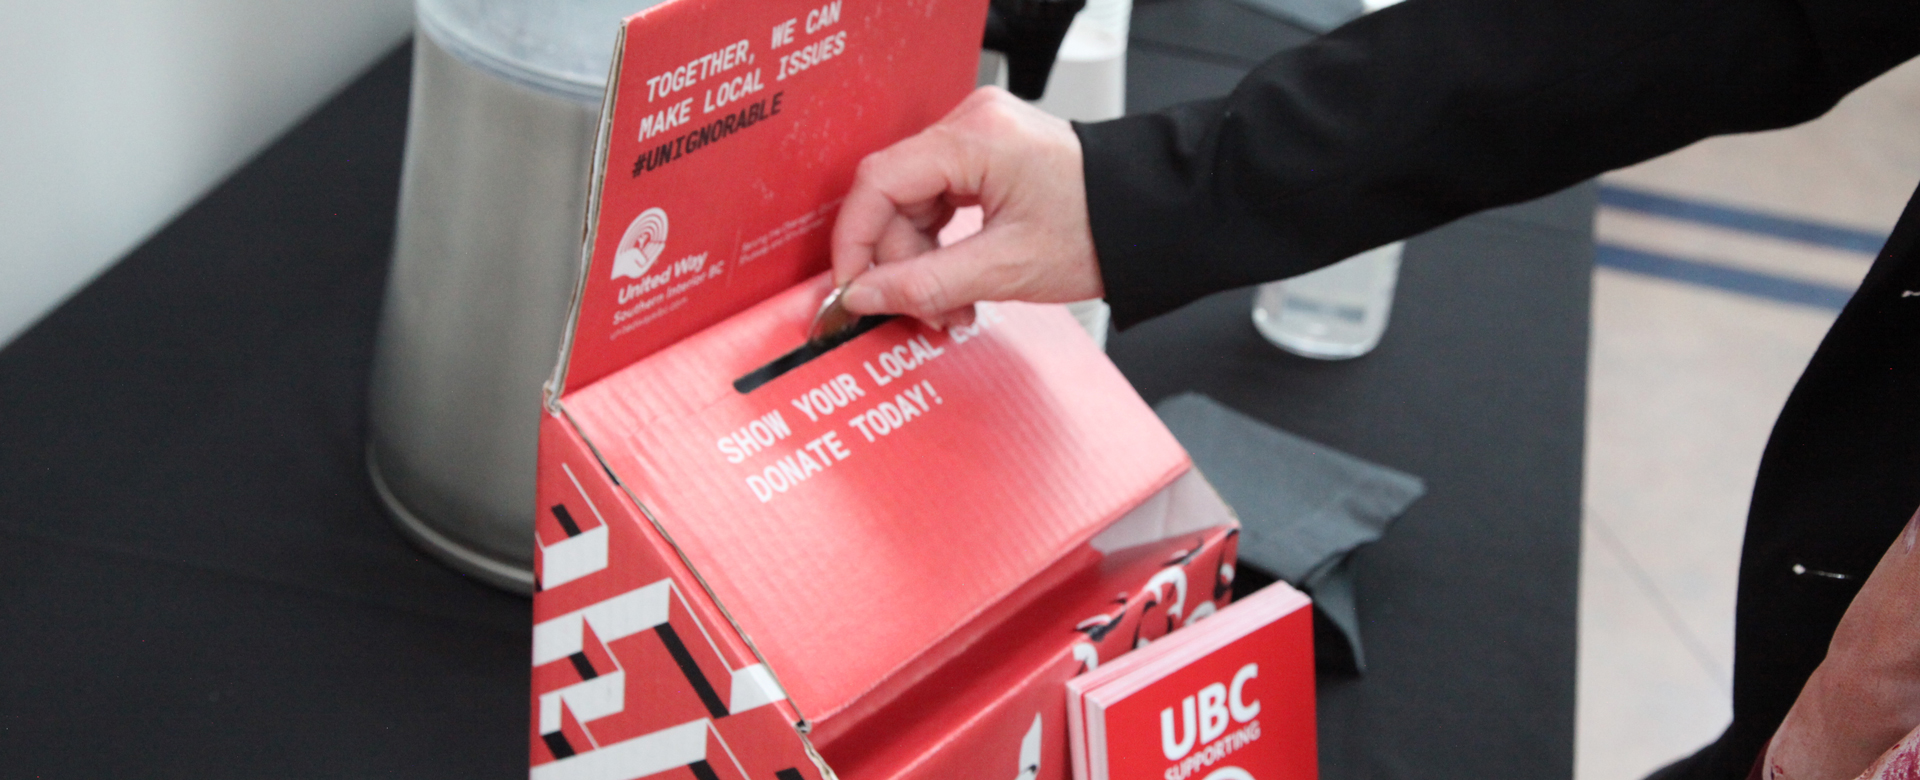 A hand placing a donation in a United Way box